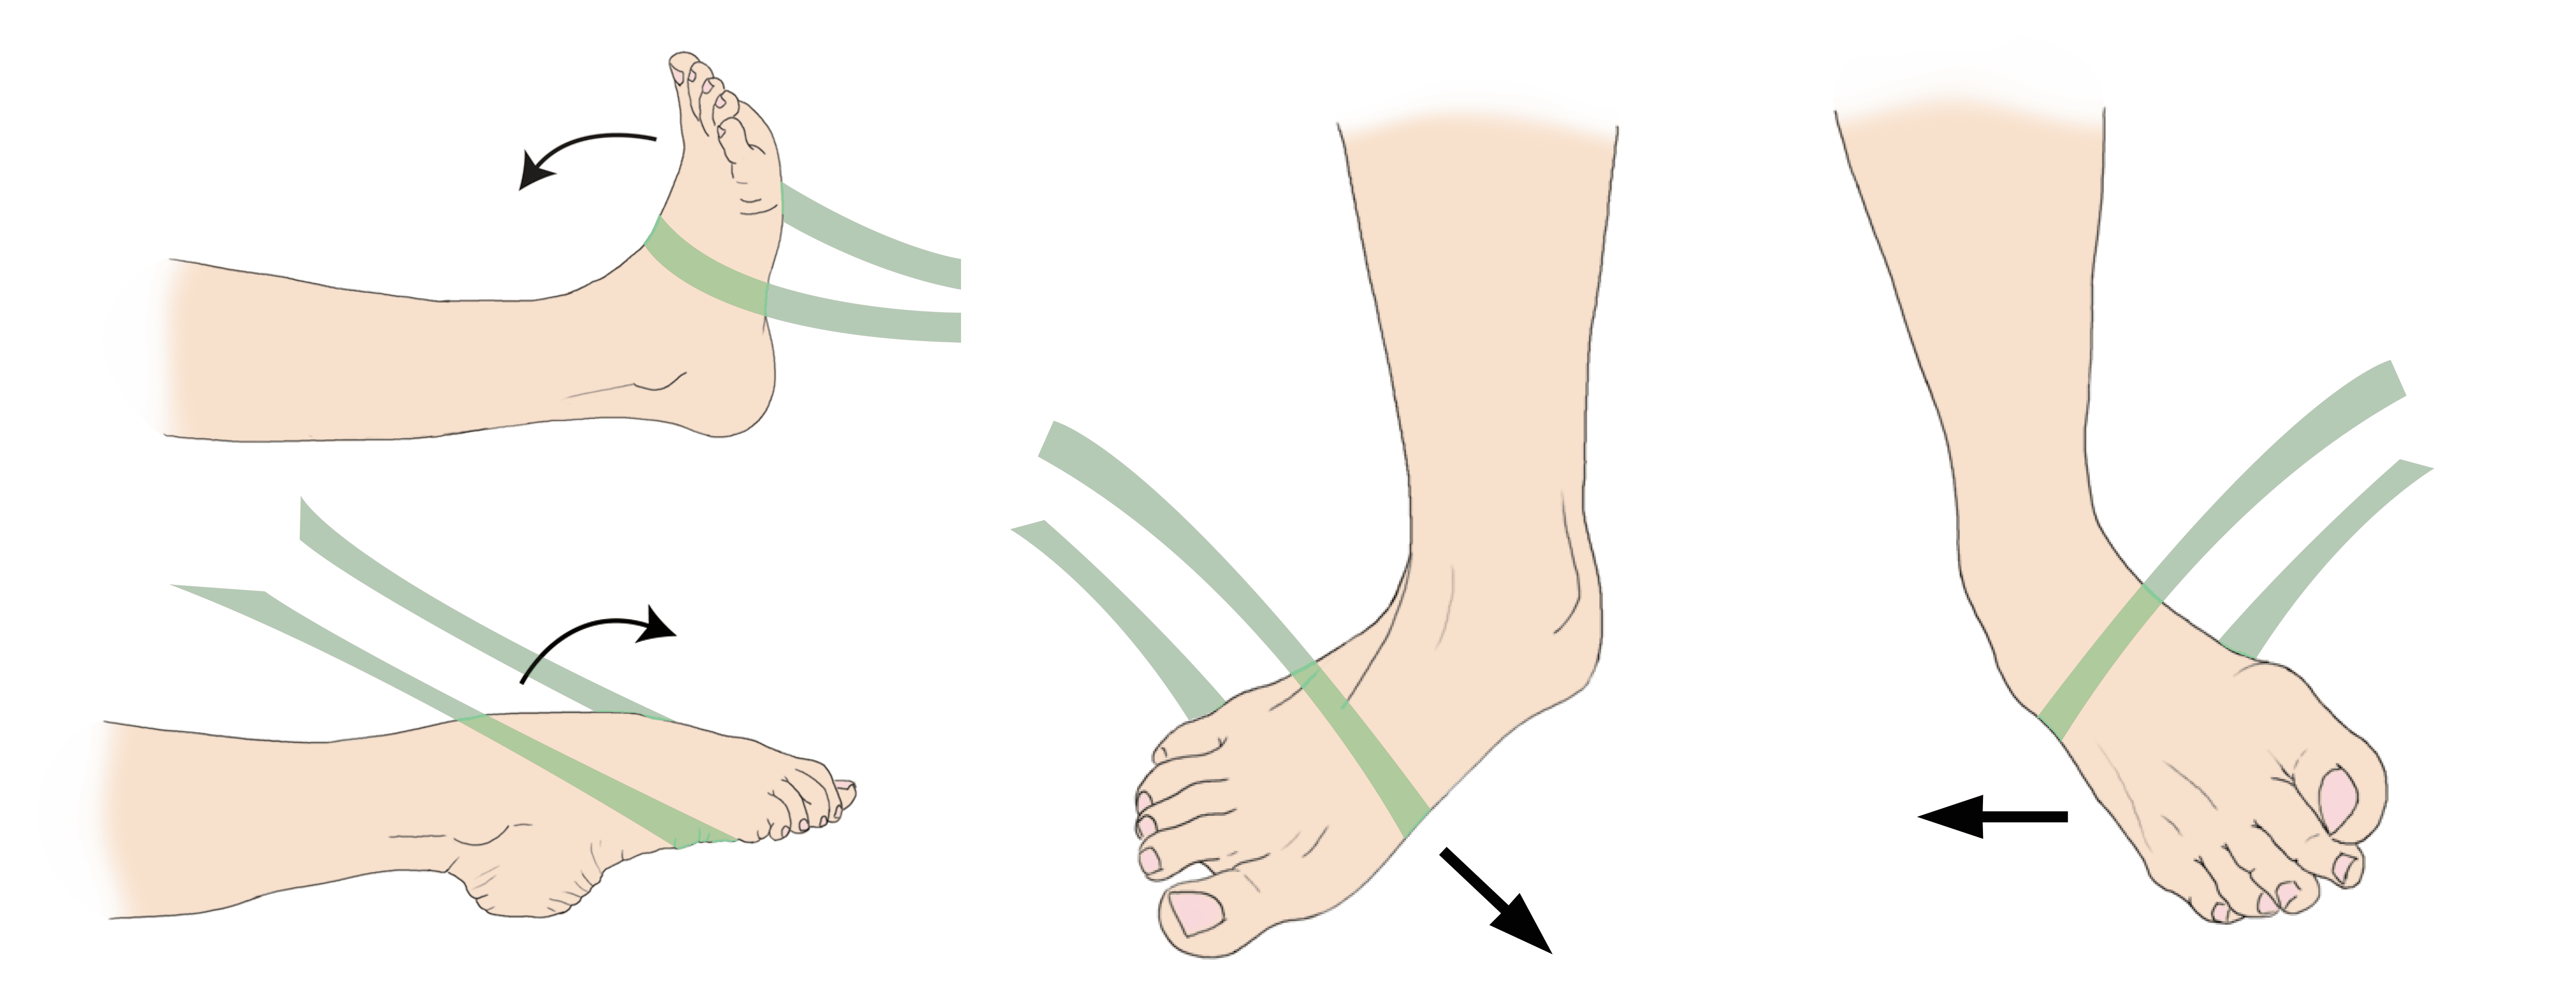 Resistance exercises after ankle sprain